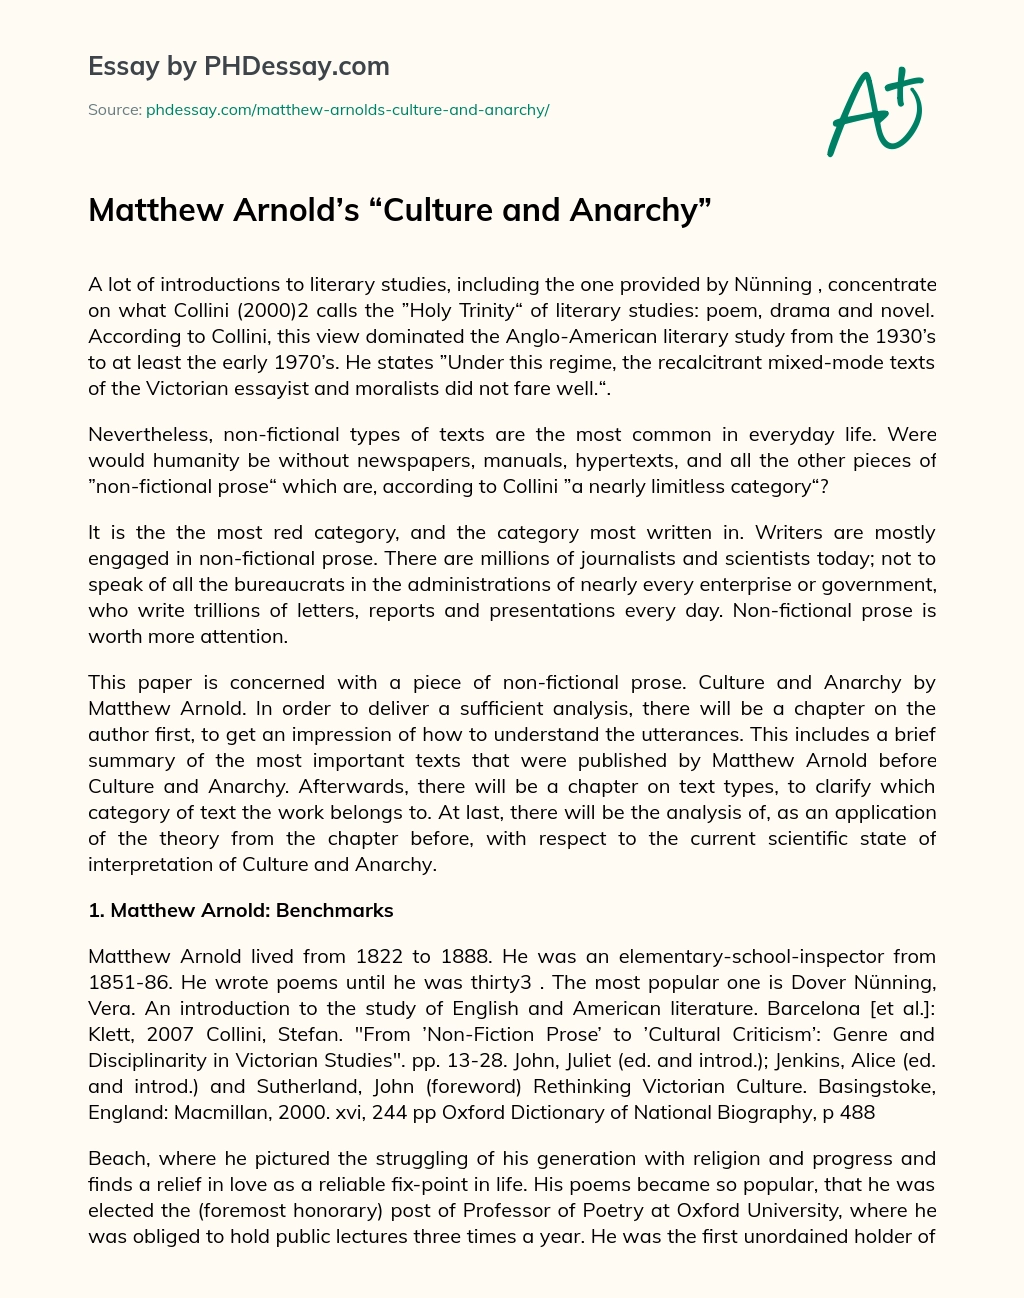 Matthew Arnold’s “Culture and Anarchy” essay